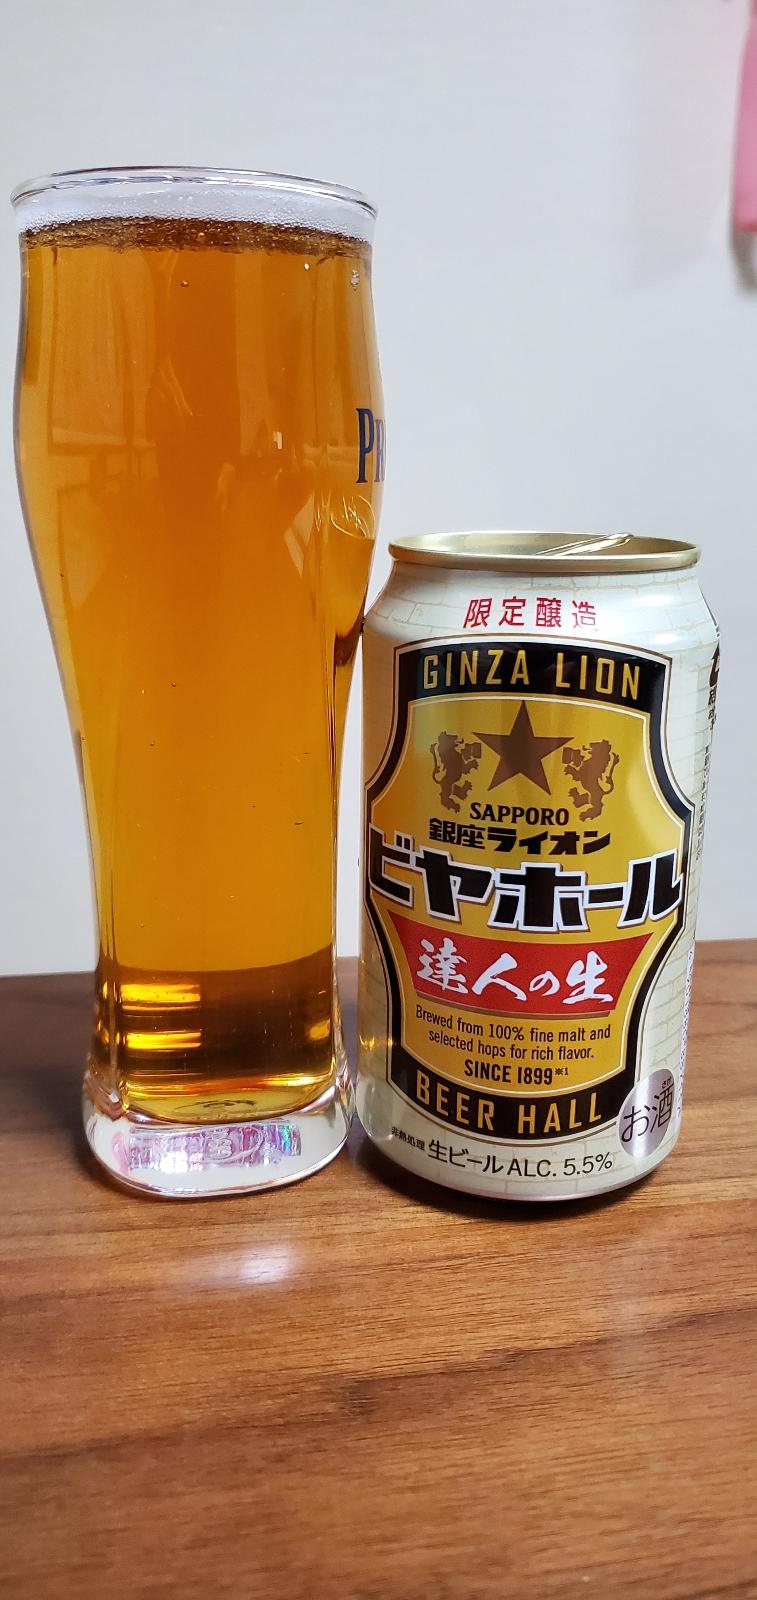 Ginza Lion Beer Hall (2022)